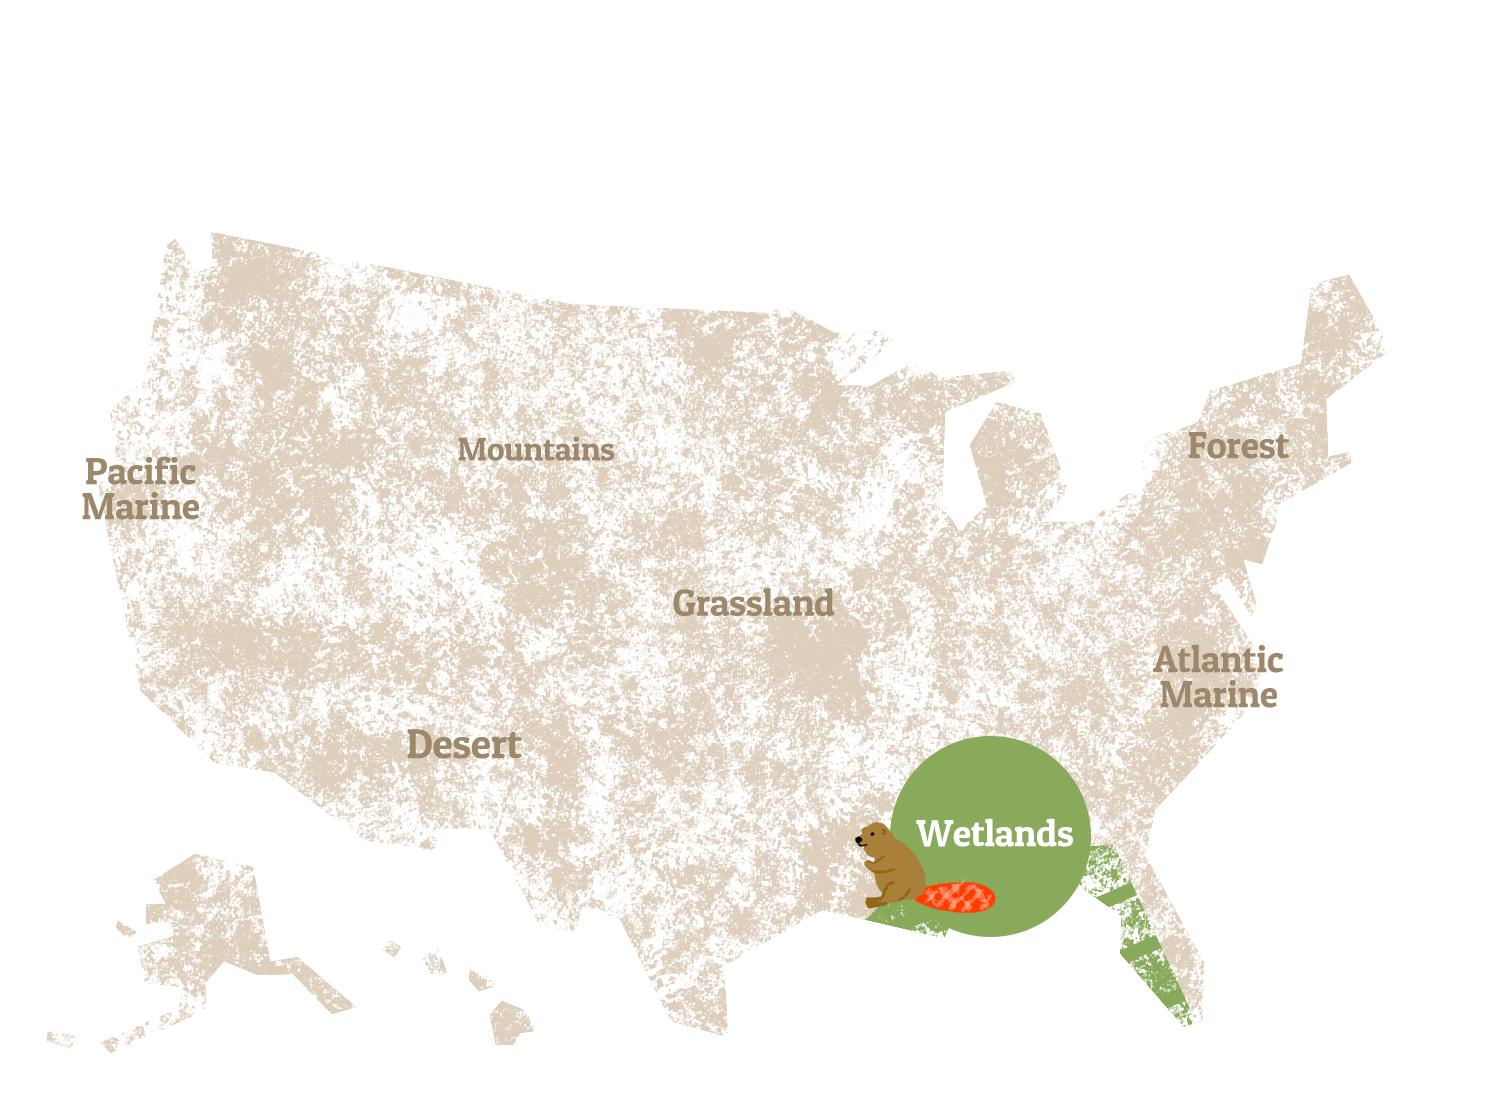 A graphic map of the United States, highlighting the Wetlands.